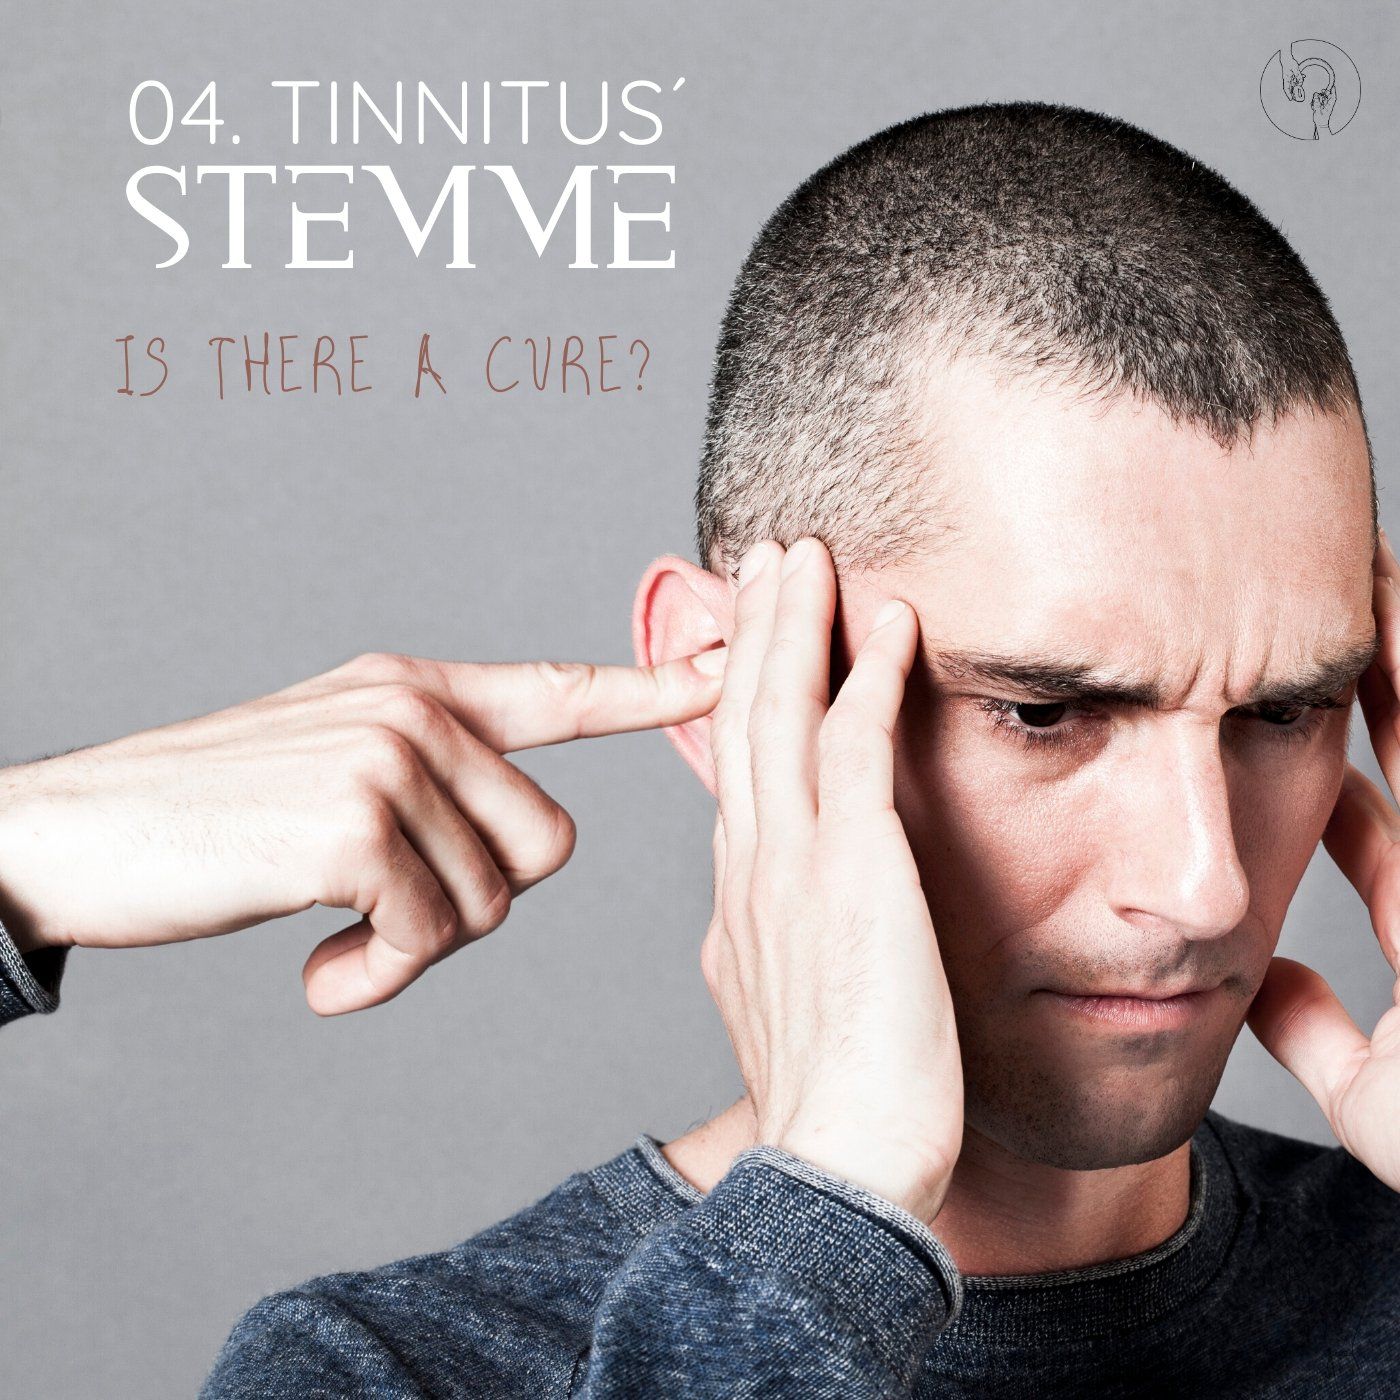 Tinnitus´ stemme - "Is there a cure?"